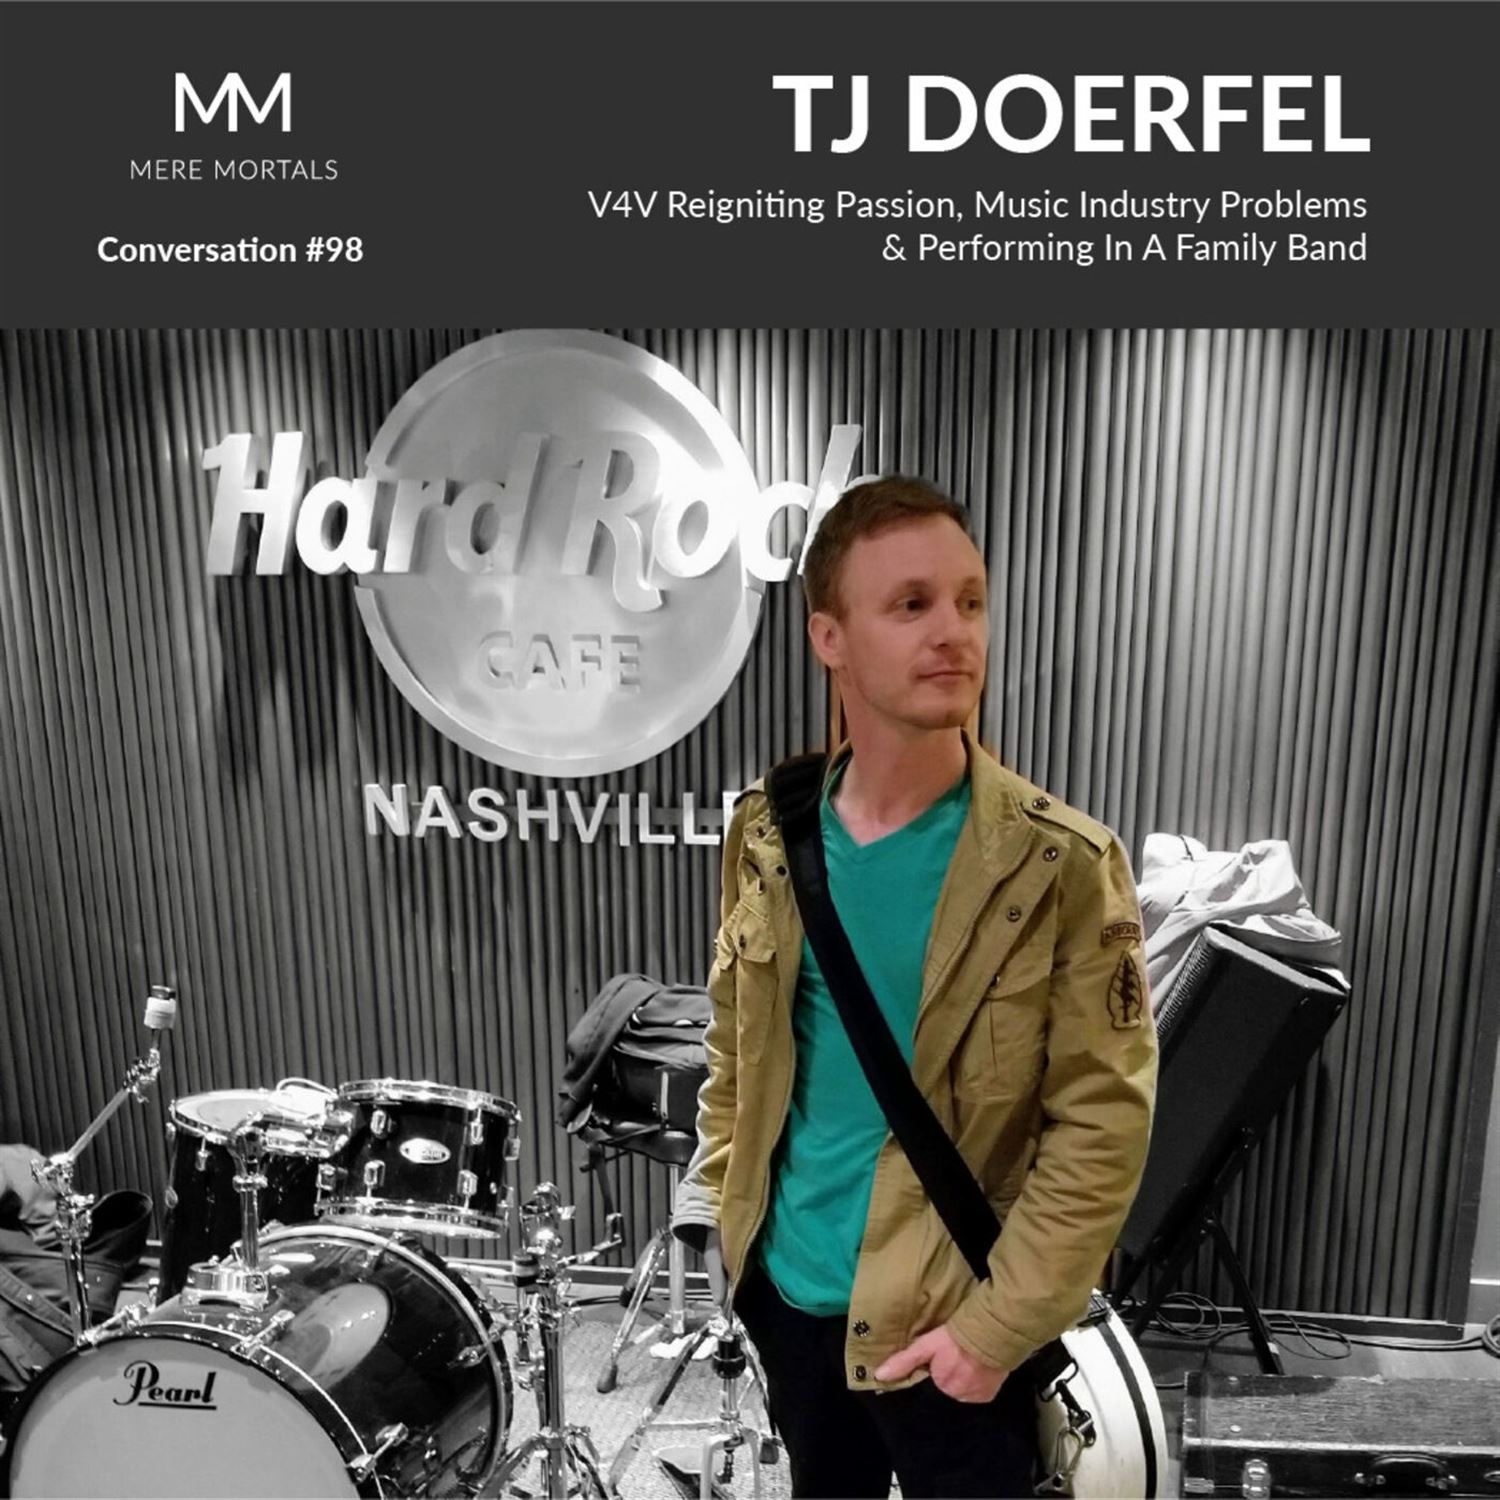 TJ DOERFEL | V4V Reigniting Passion, Music Industry Problems & Performing In A Family Band